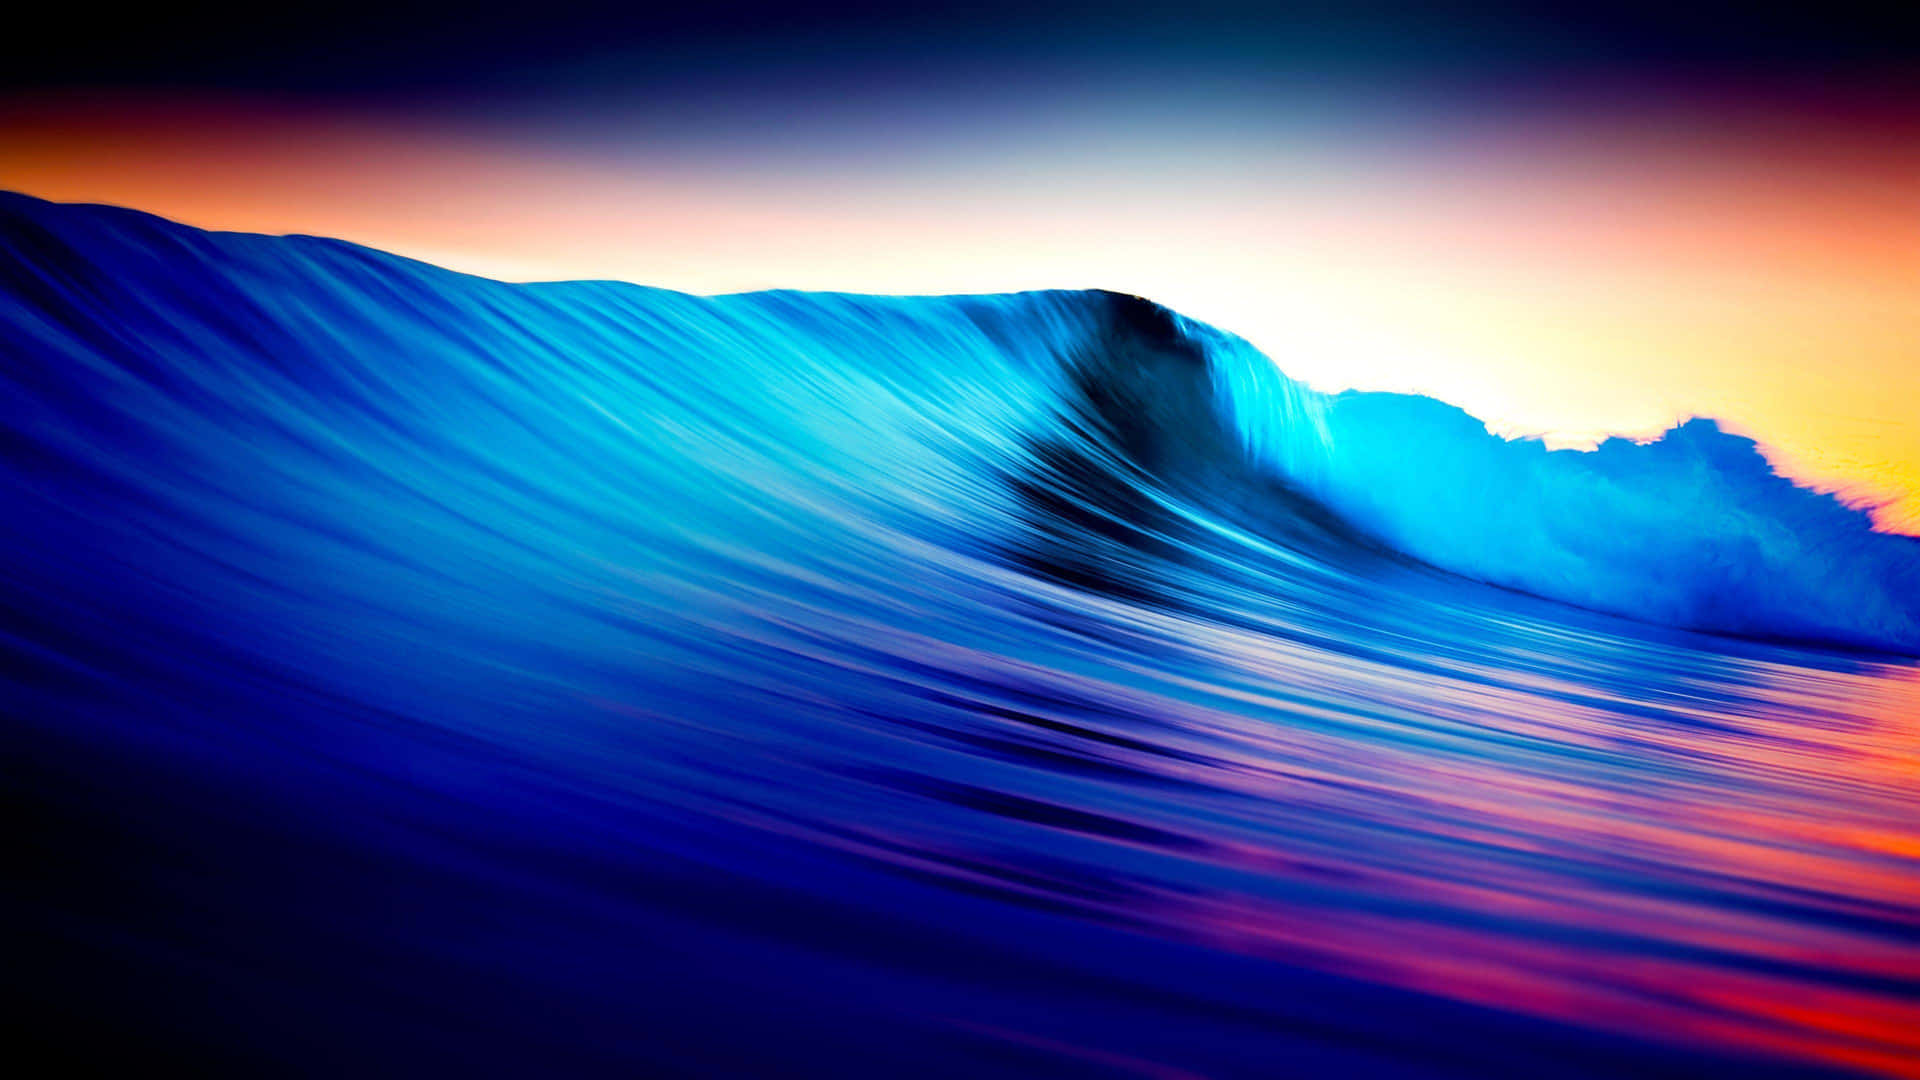 A Blue And Orange Wave At Sunset Wallpaper